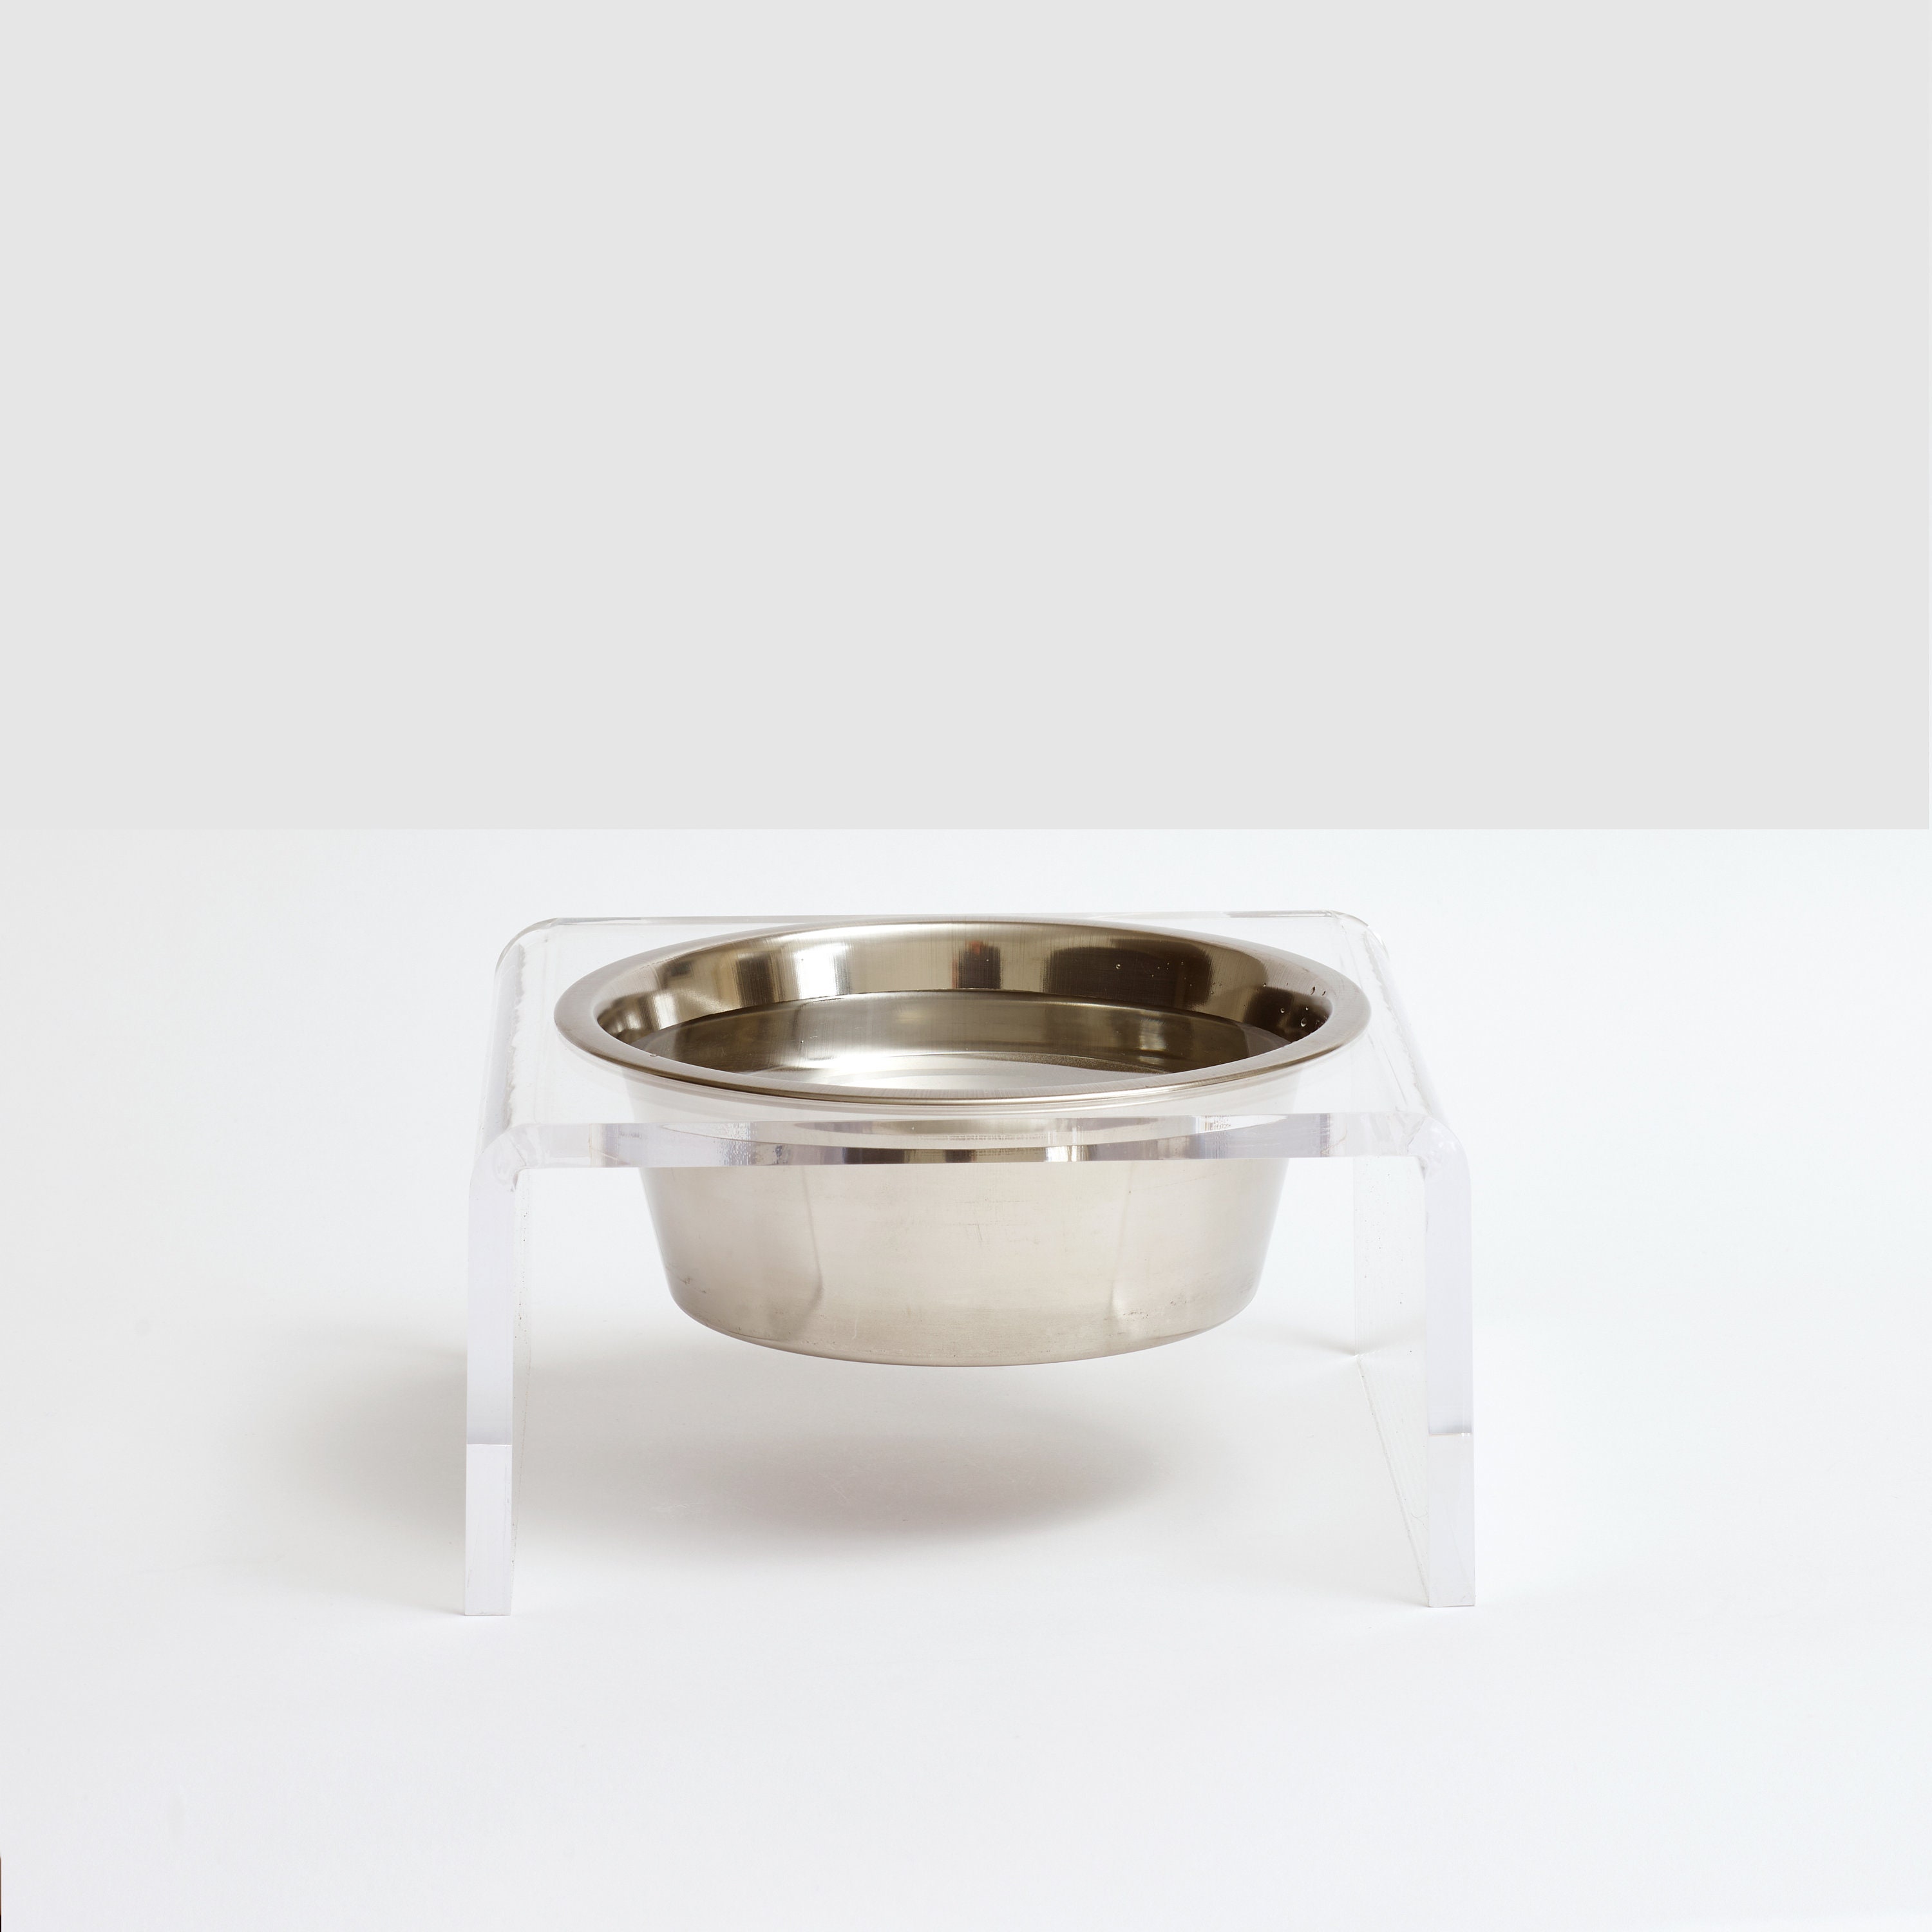 Dog and Cat Bowls Elevated Set - Acrylic Feeder Stand with 2 Set Removable Stainless Steel and Glass Bowls Food and Water Raised Dishes for Small